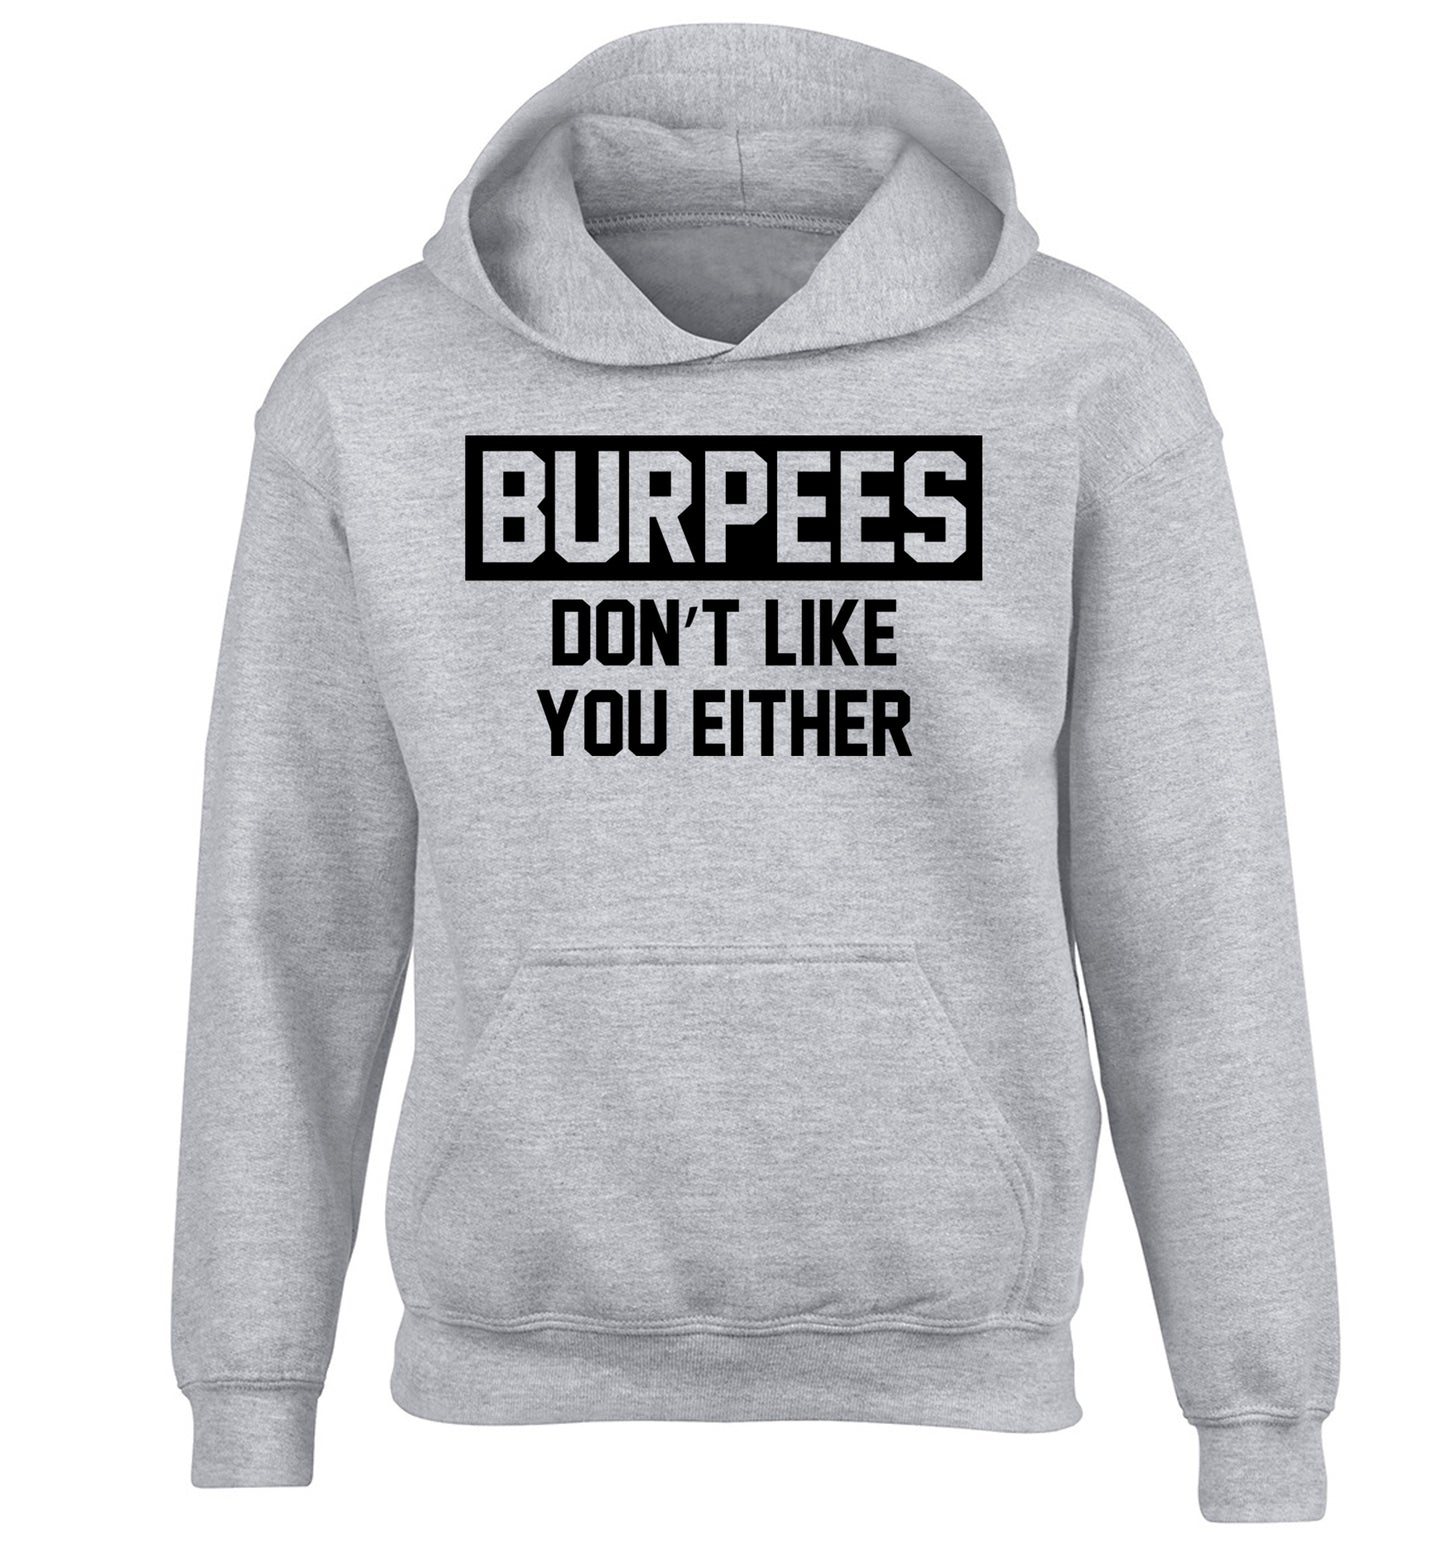 Burpees don't like you either children's grey hoodie 12-14 Years